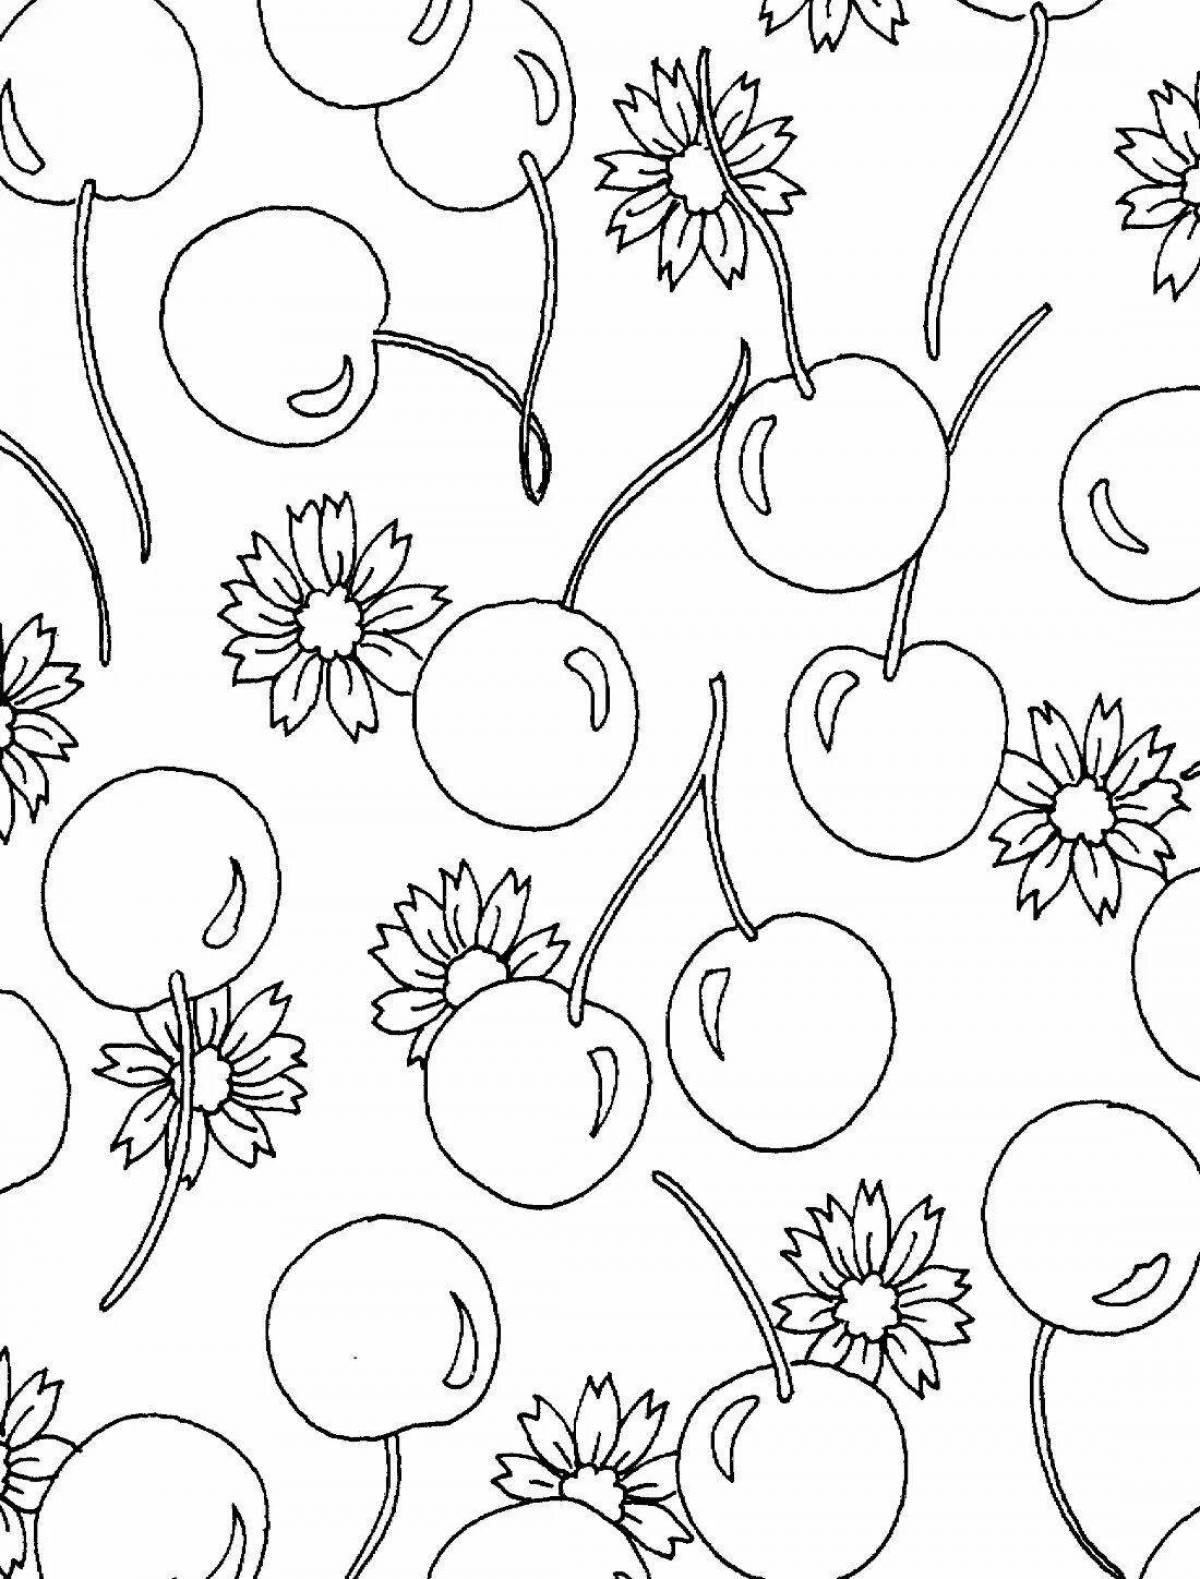 Exciting coloring page background